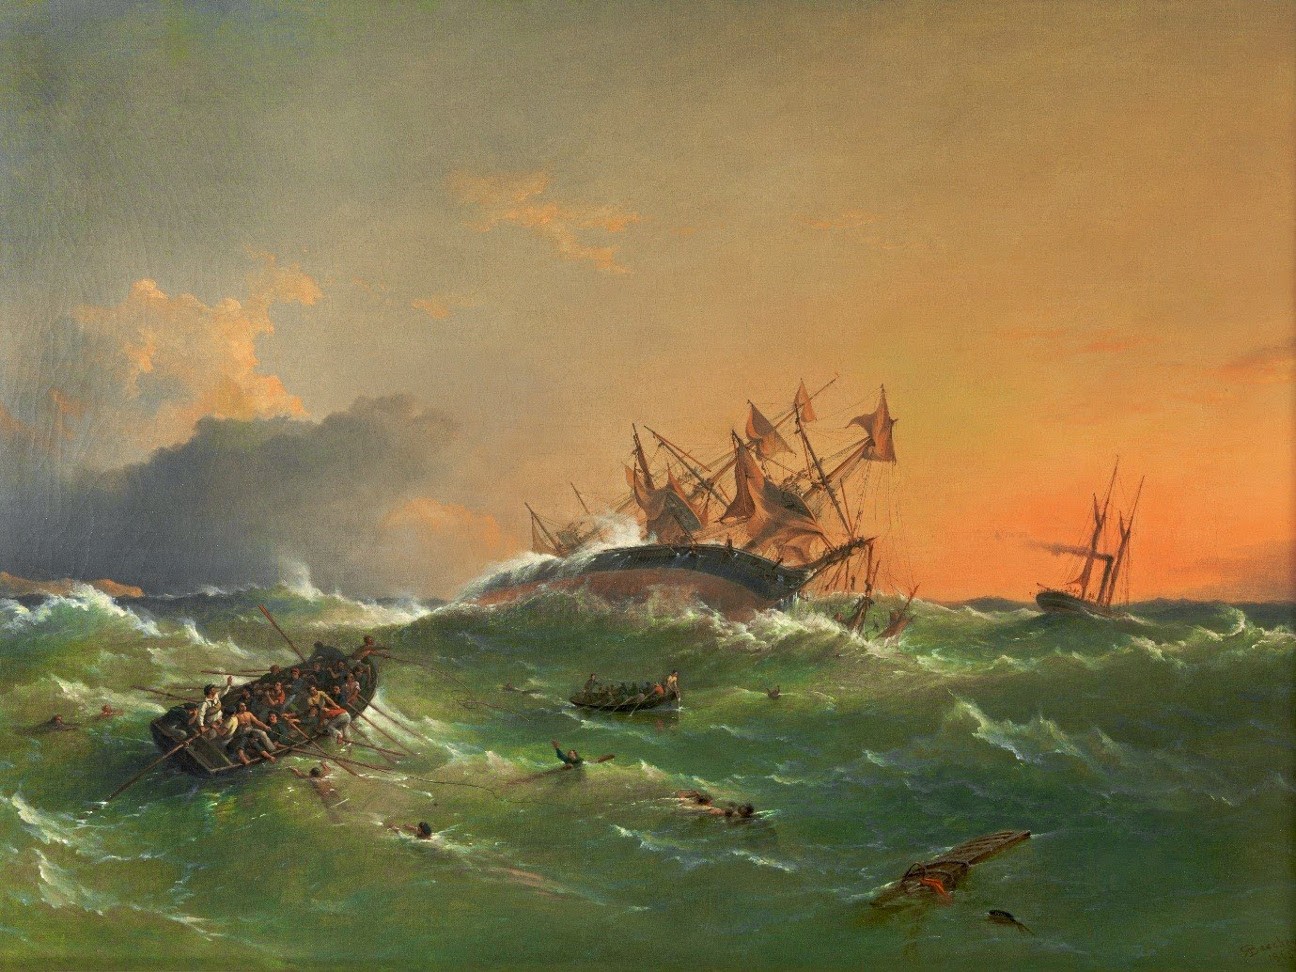 Wreck of the HMS Orpheus